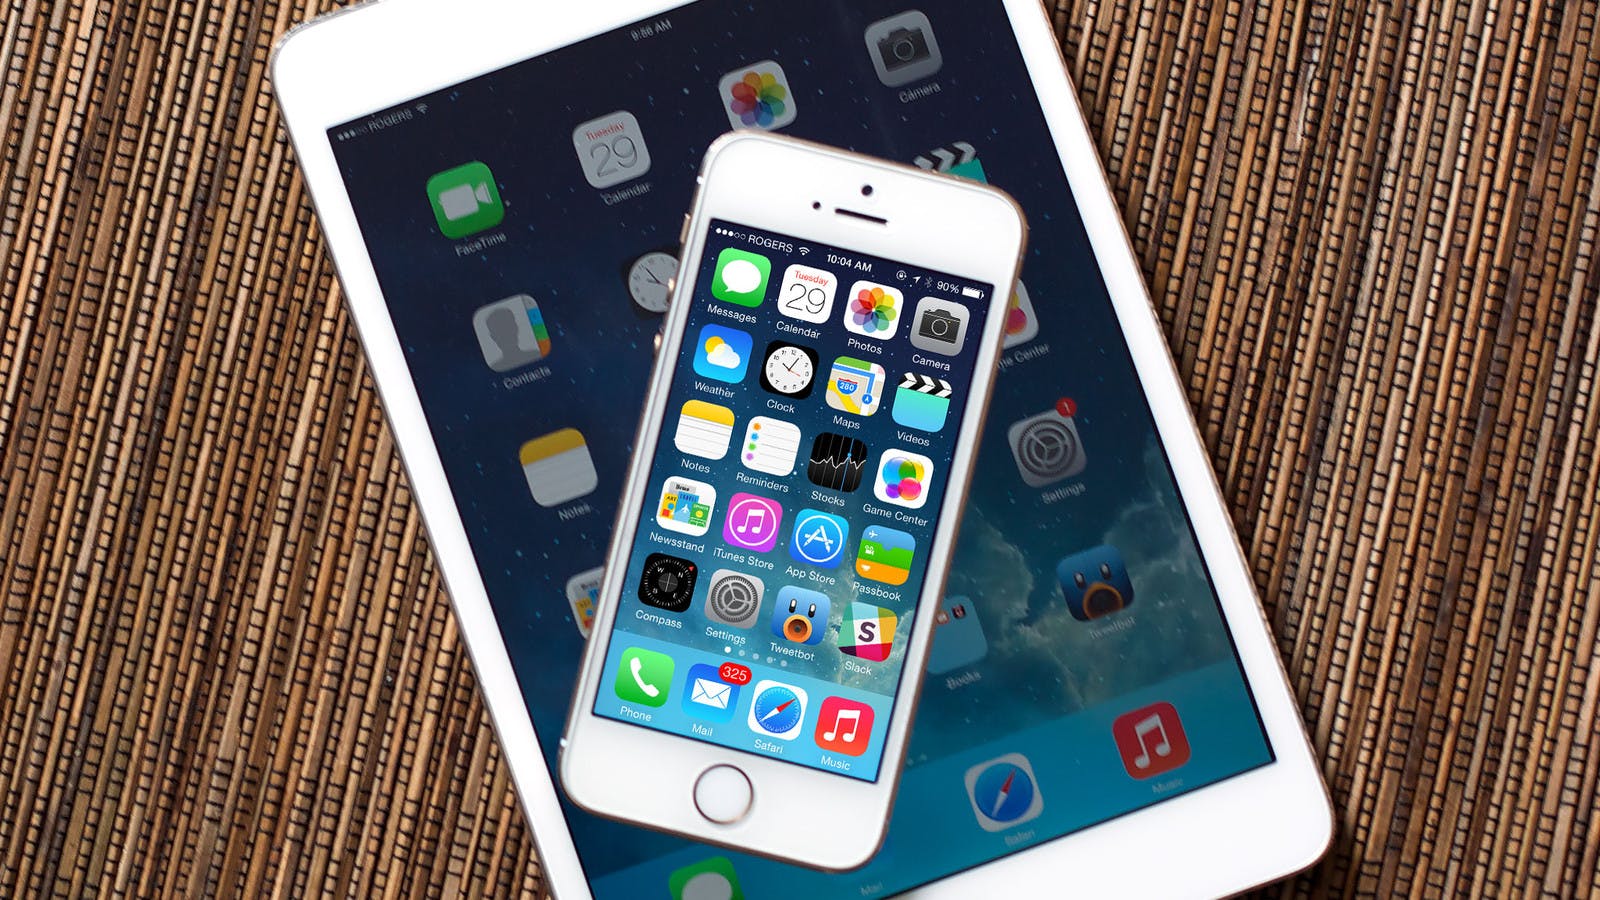 How To Protect Your iPhone or iPad With A 6-Digit Passcode In iOS 9 featured image